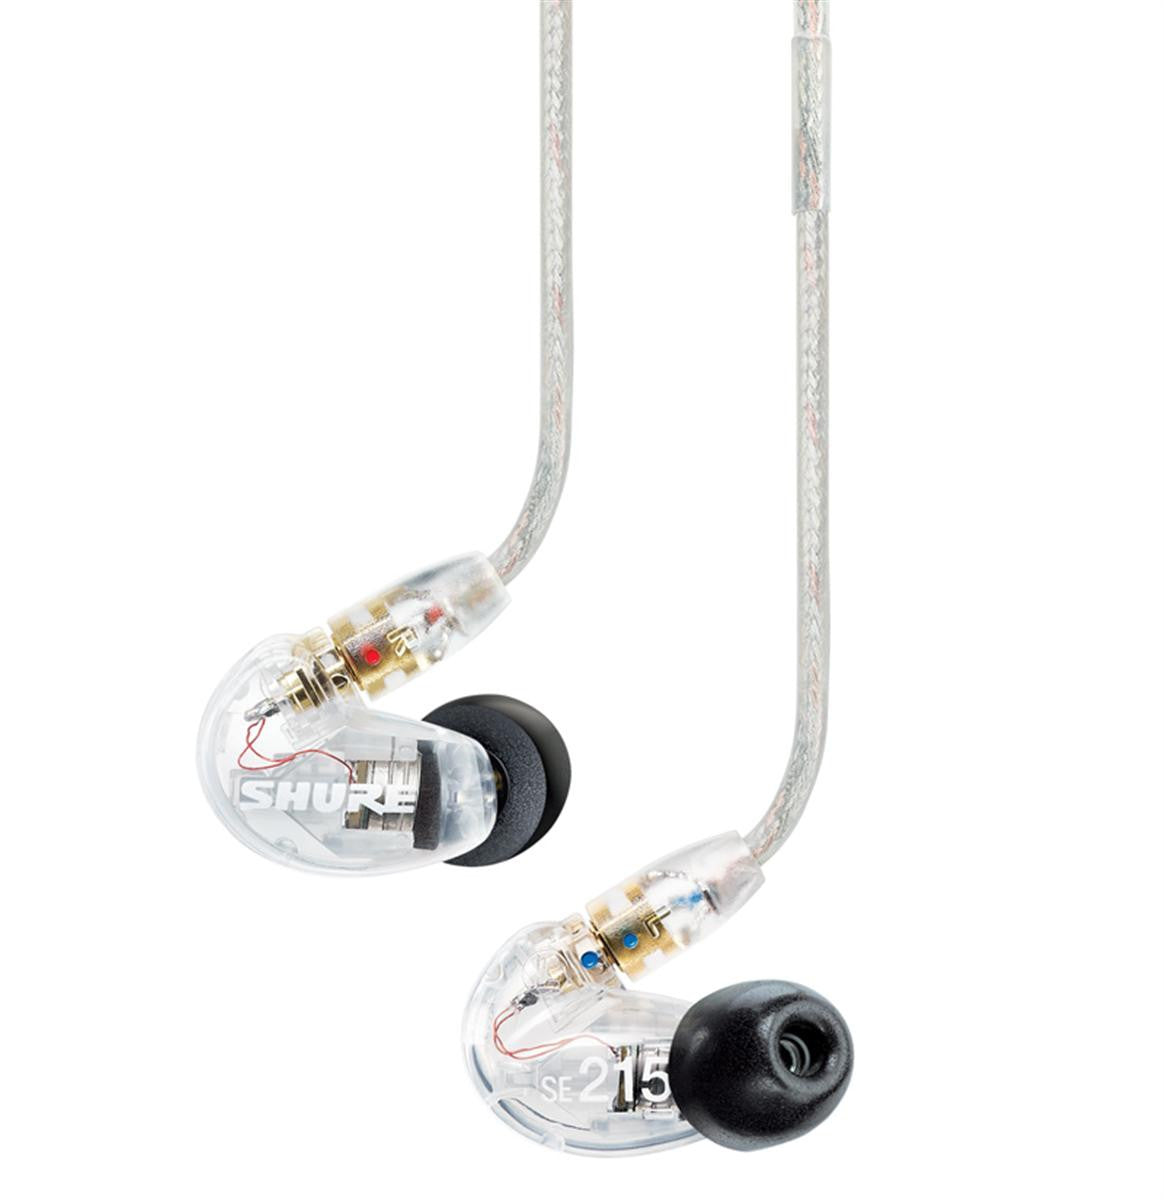 SE215 Sound Isolating Earphones - Clear